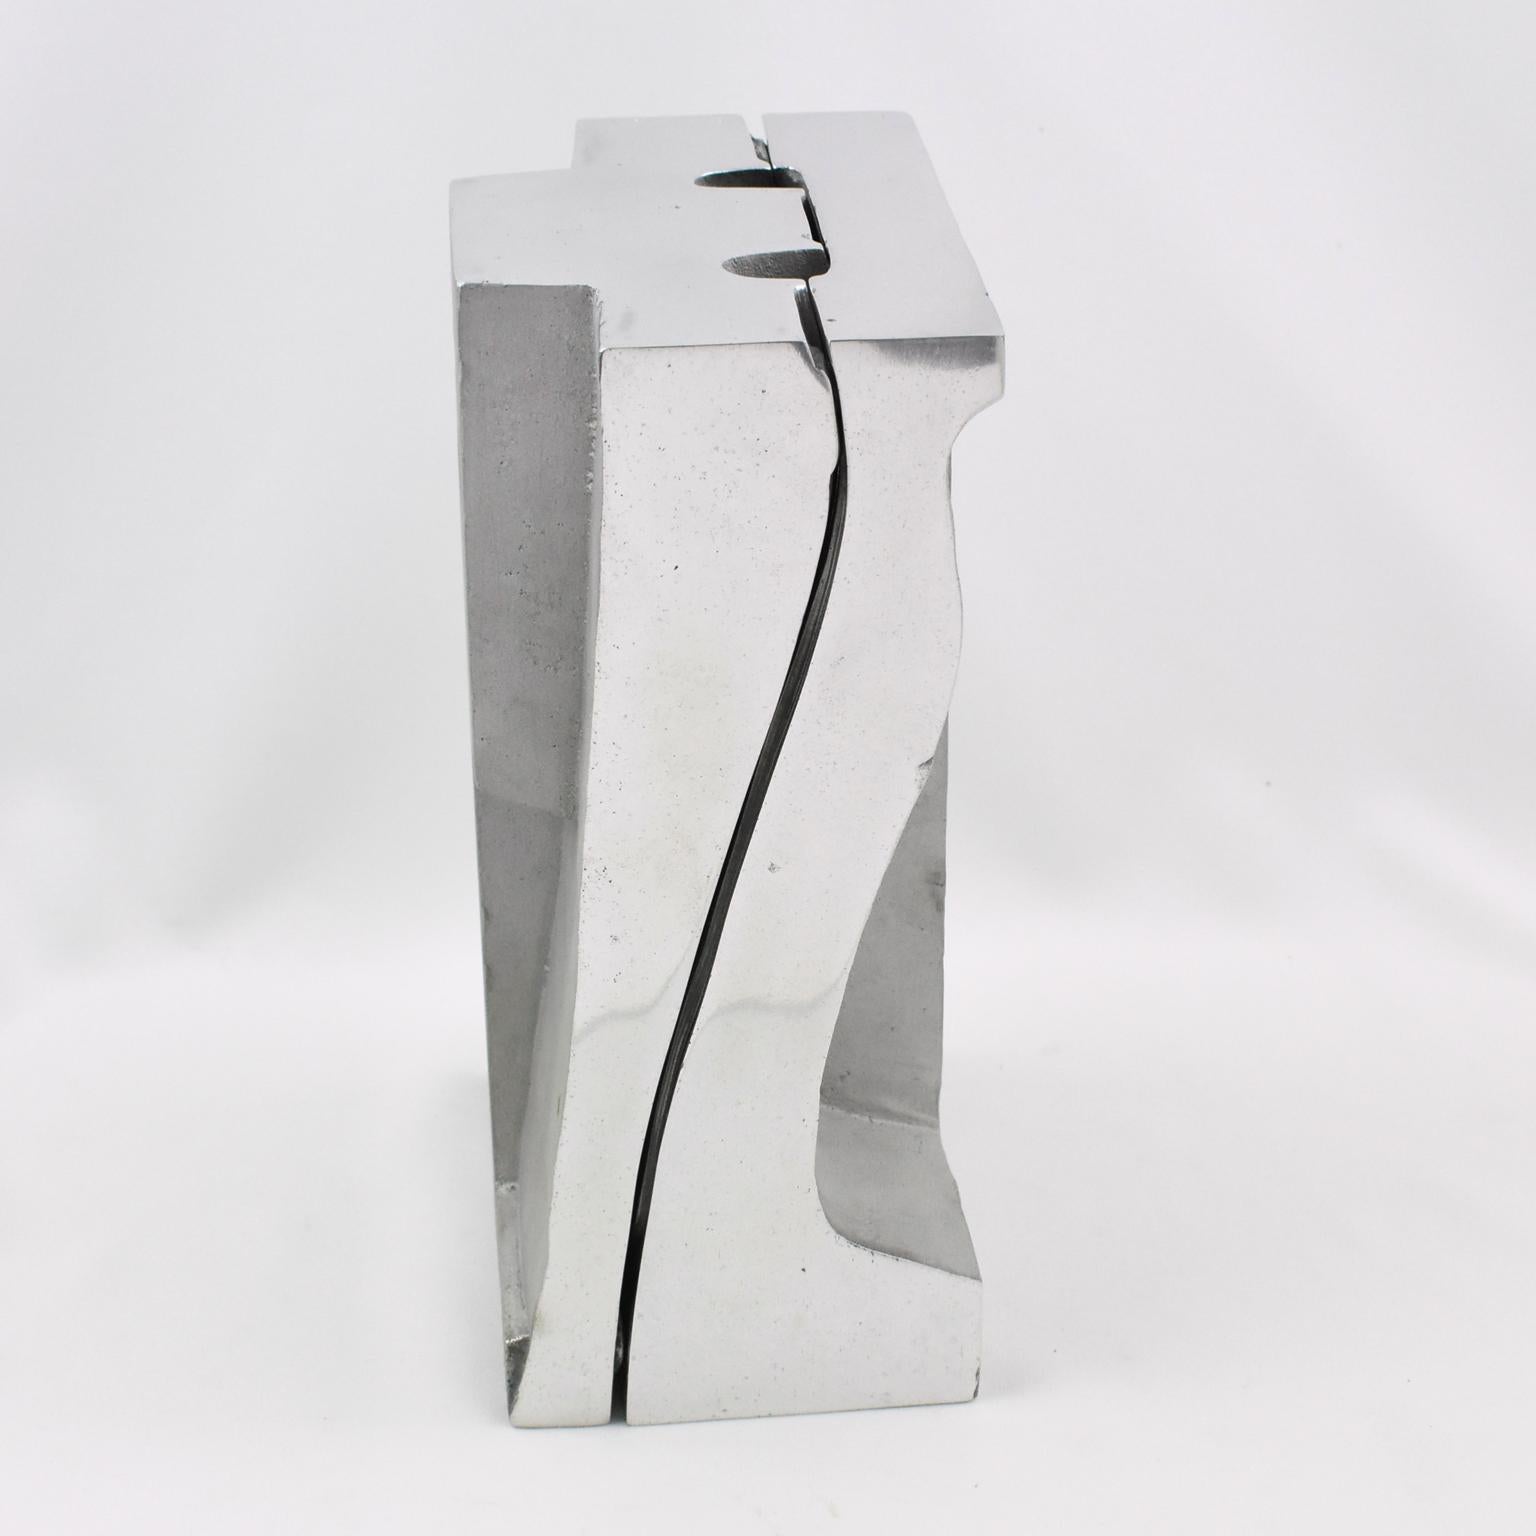 20th Century Stainless Steel Industrial Hand Glove Mold Sculpture Bookends, a pair For Sale